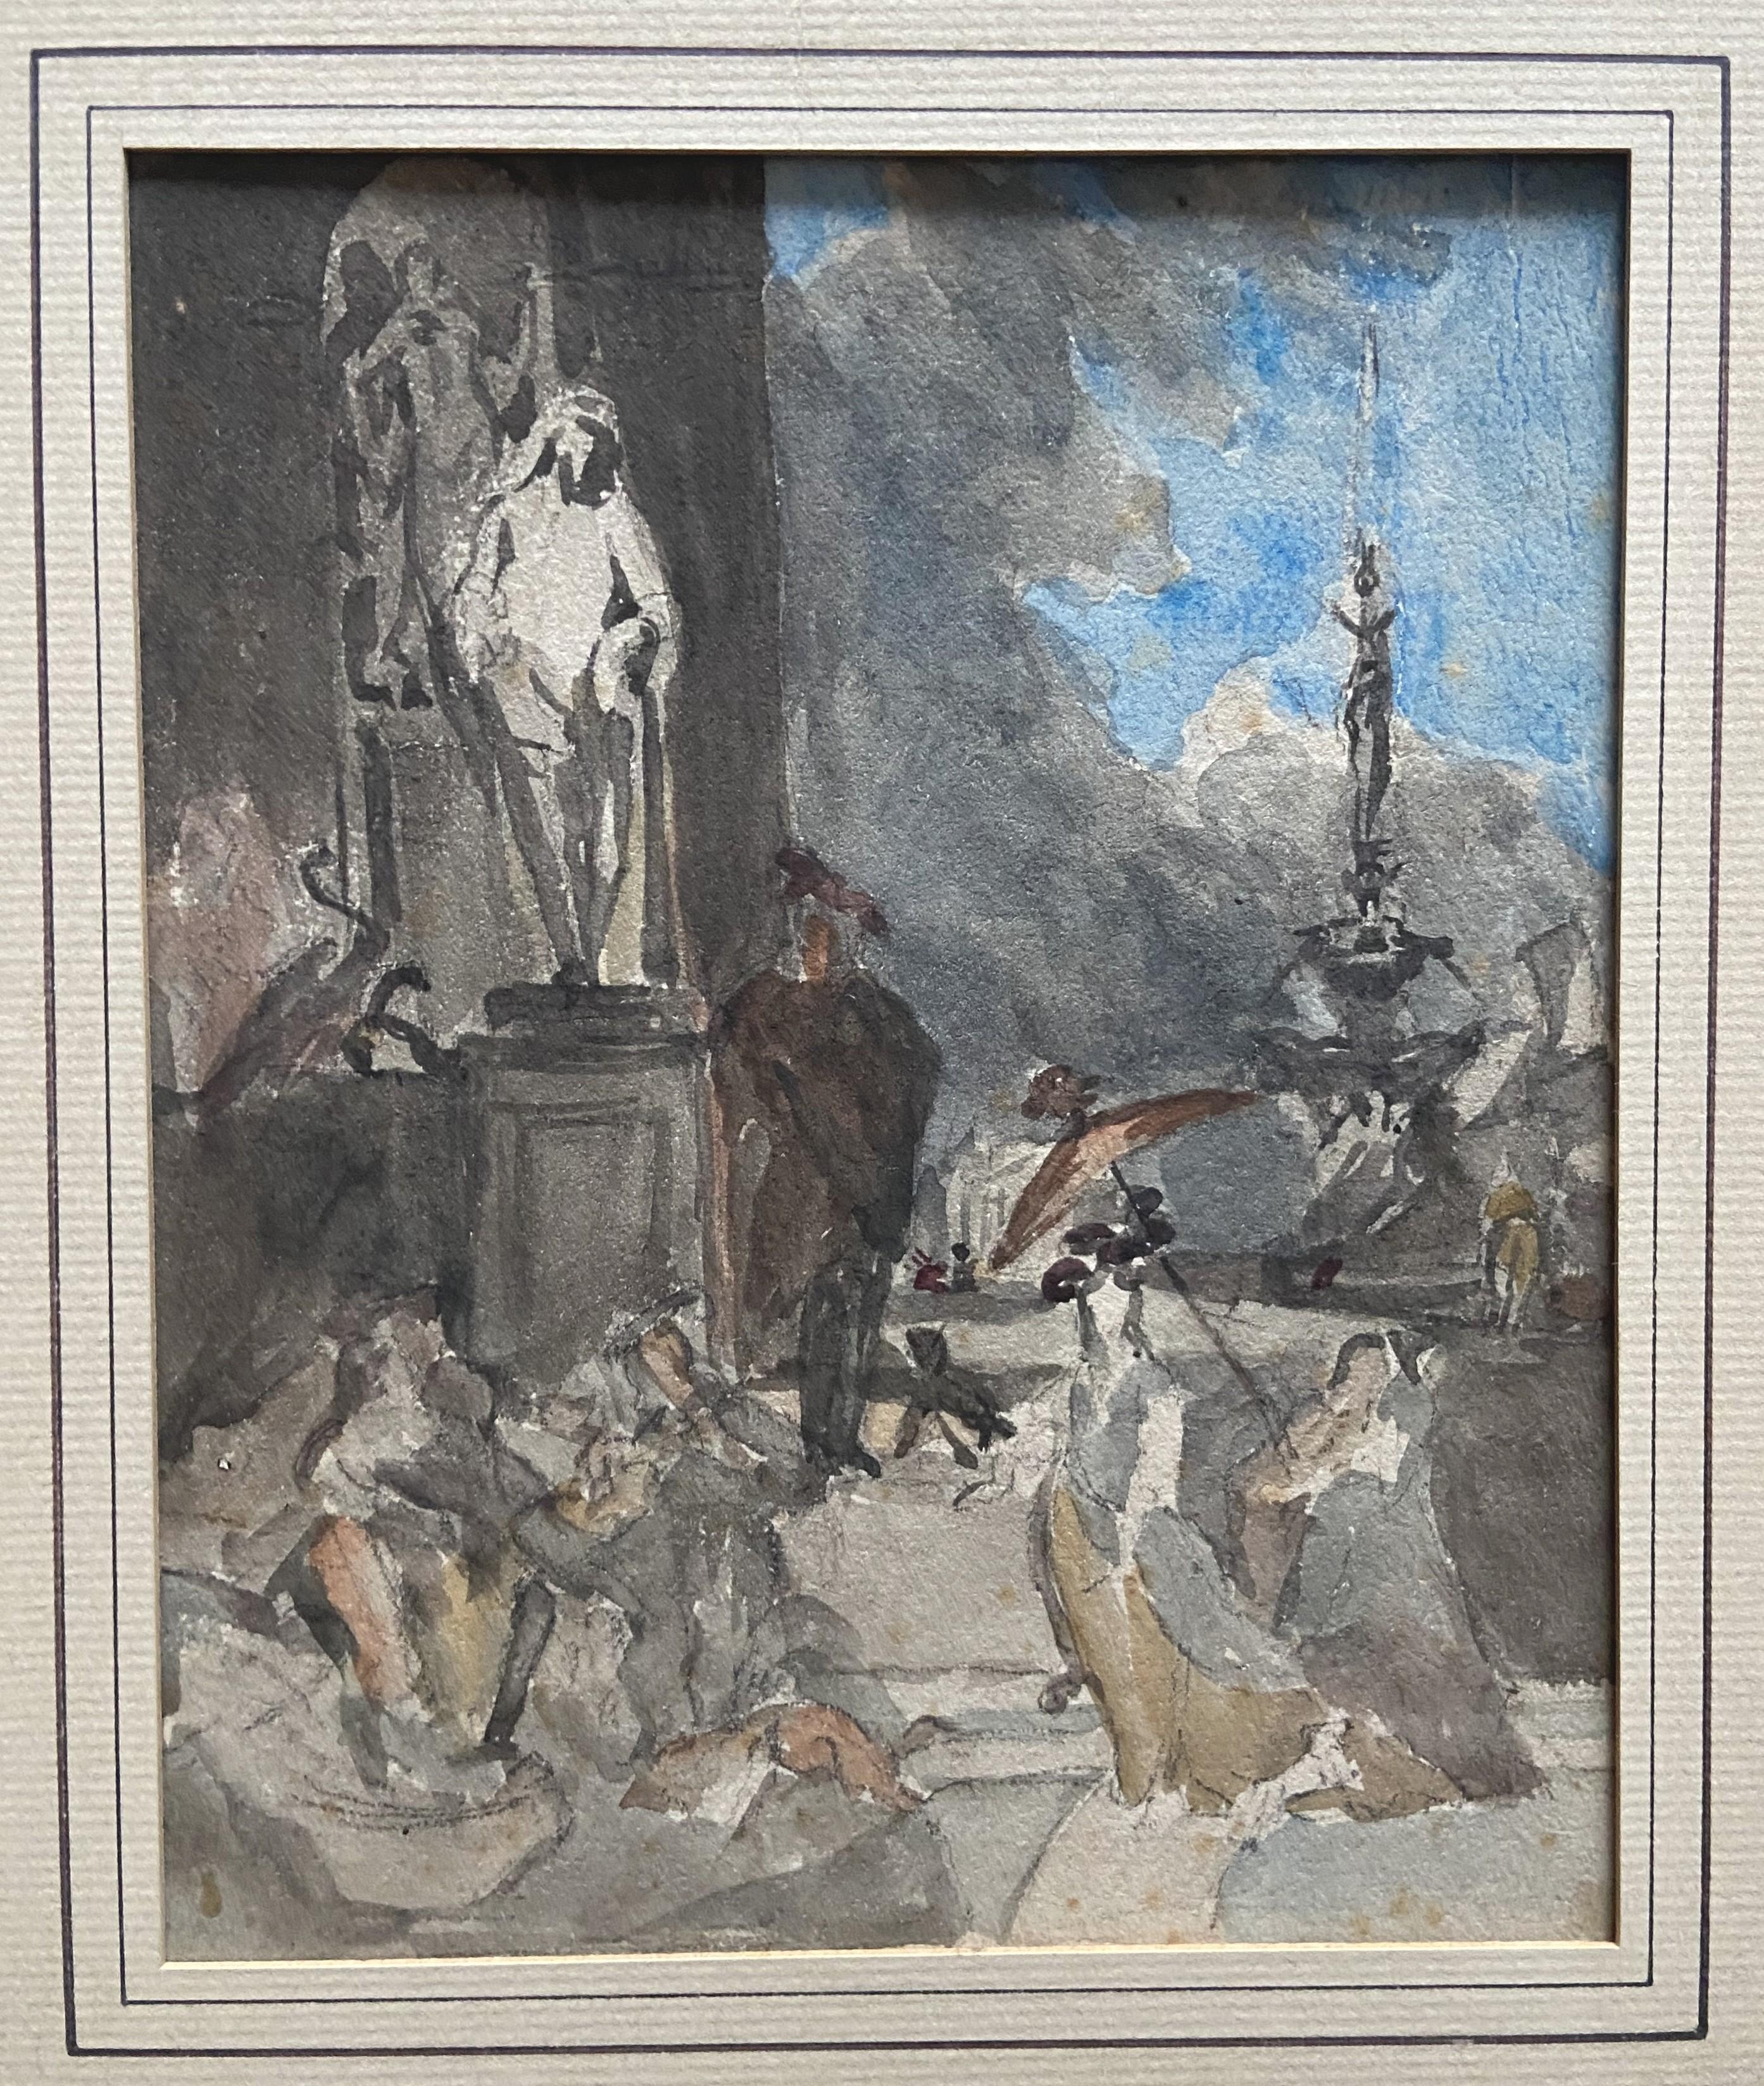 French school 19th century, 
Court scene in front of a palace
watercolor on paper
16.4 x 13.3 cm
In good condition, some foxings 
Framed : 30 x 26.5 cm

This enigmatic yet charming scene may have been attributed to Eugène Lami (1800-1890), as